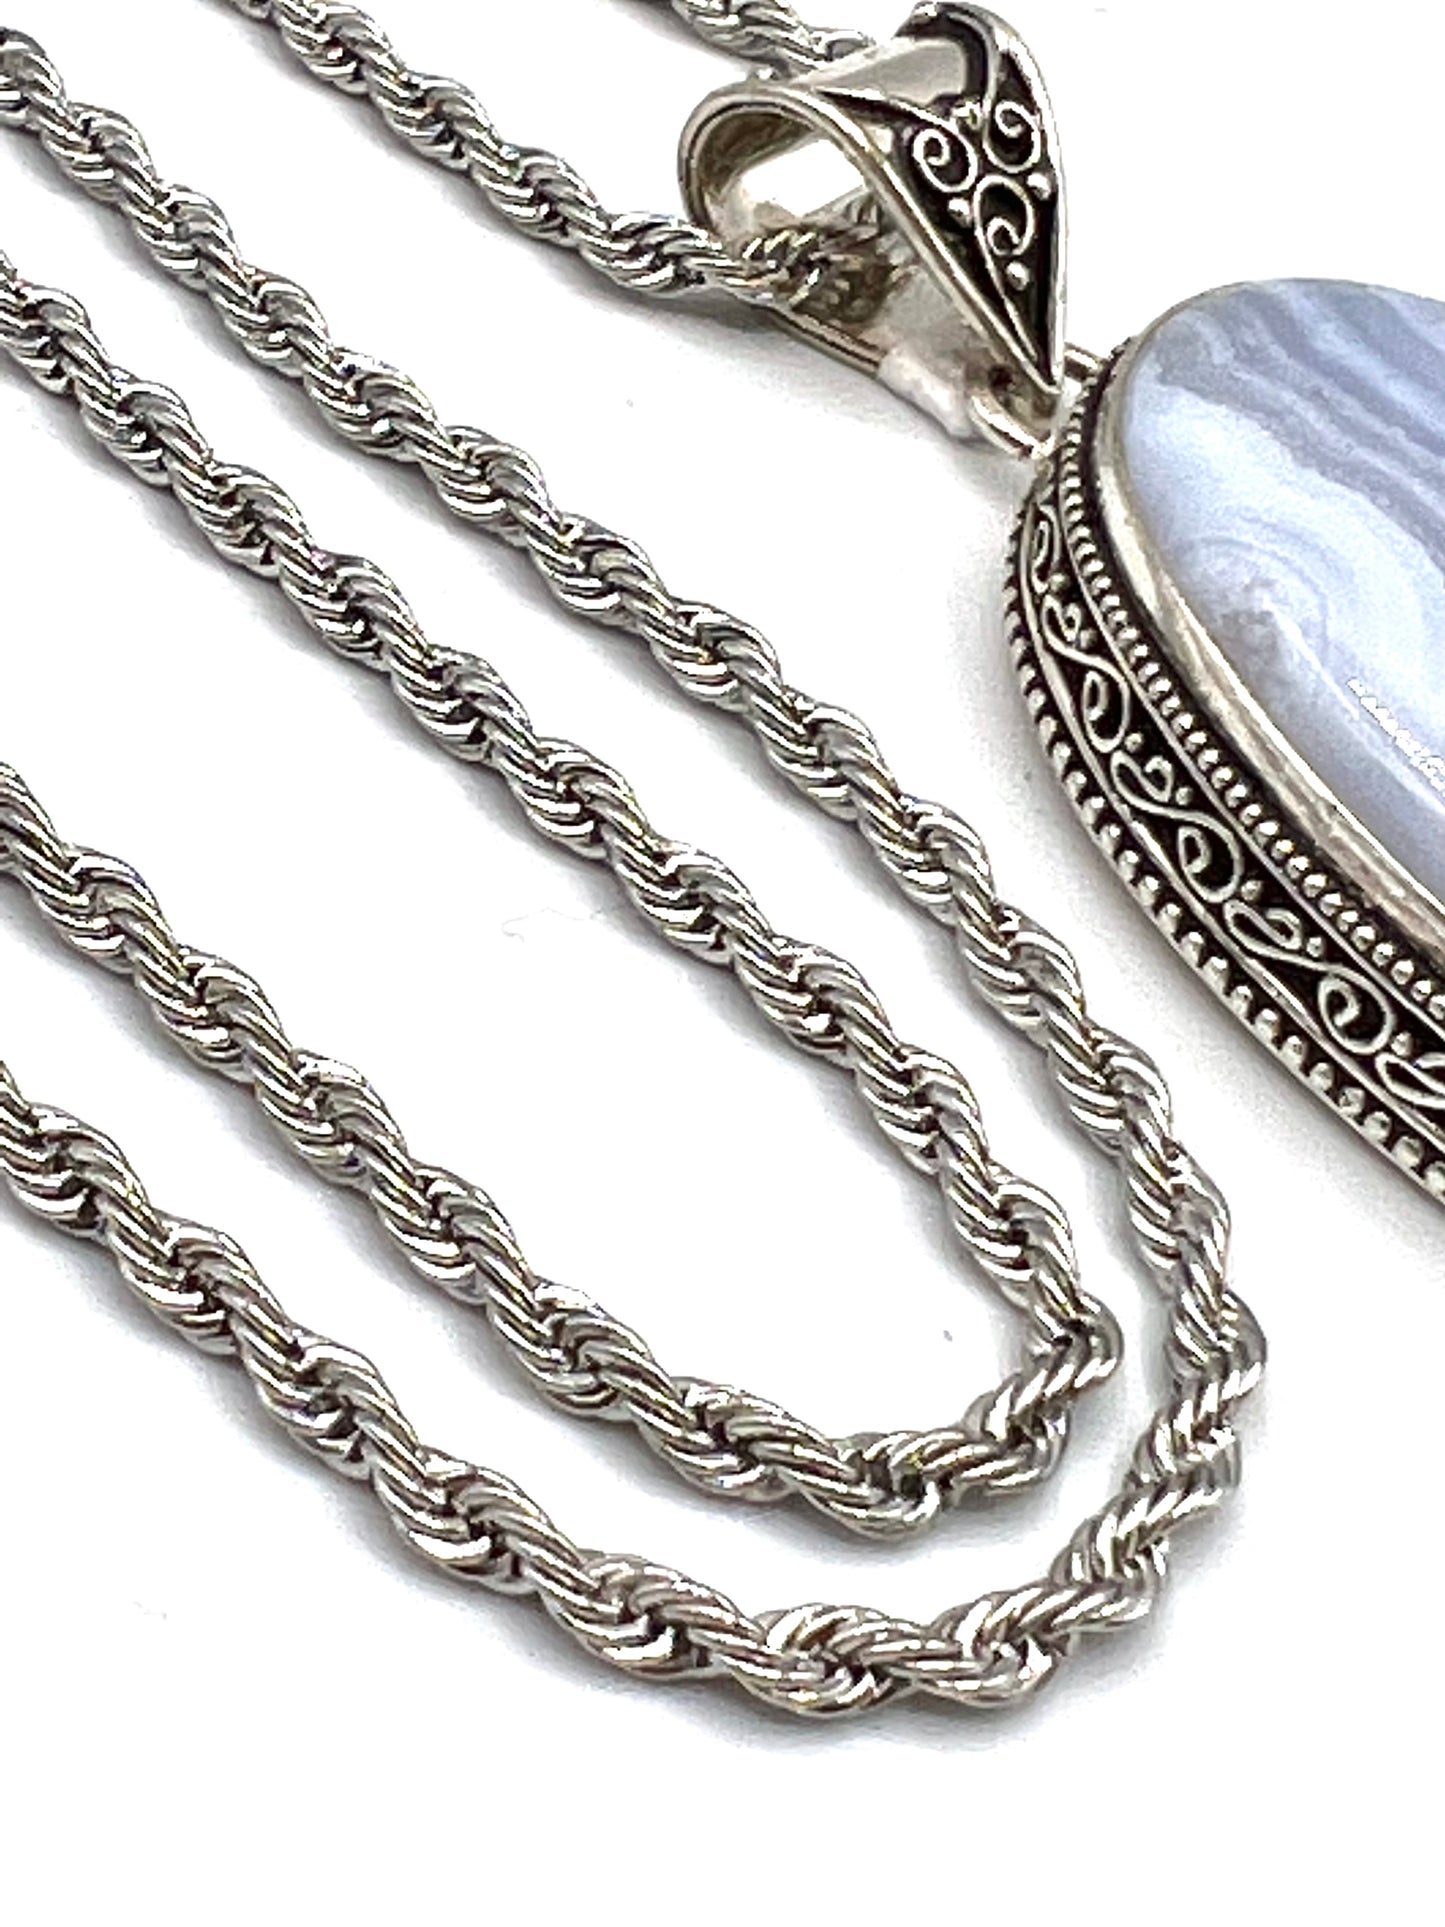 Blue Lace Agate  Sterling Silver Necklace large Pendant Charm Oval Women Or Men